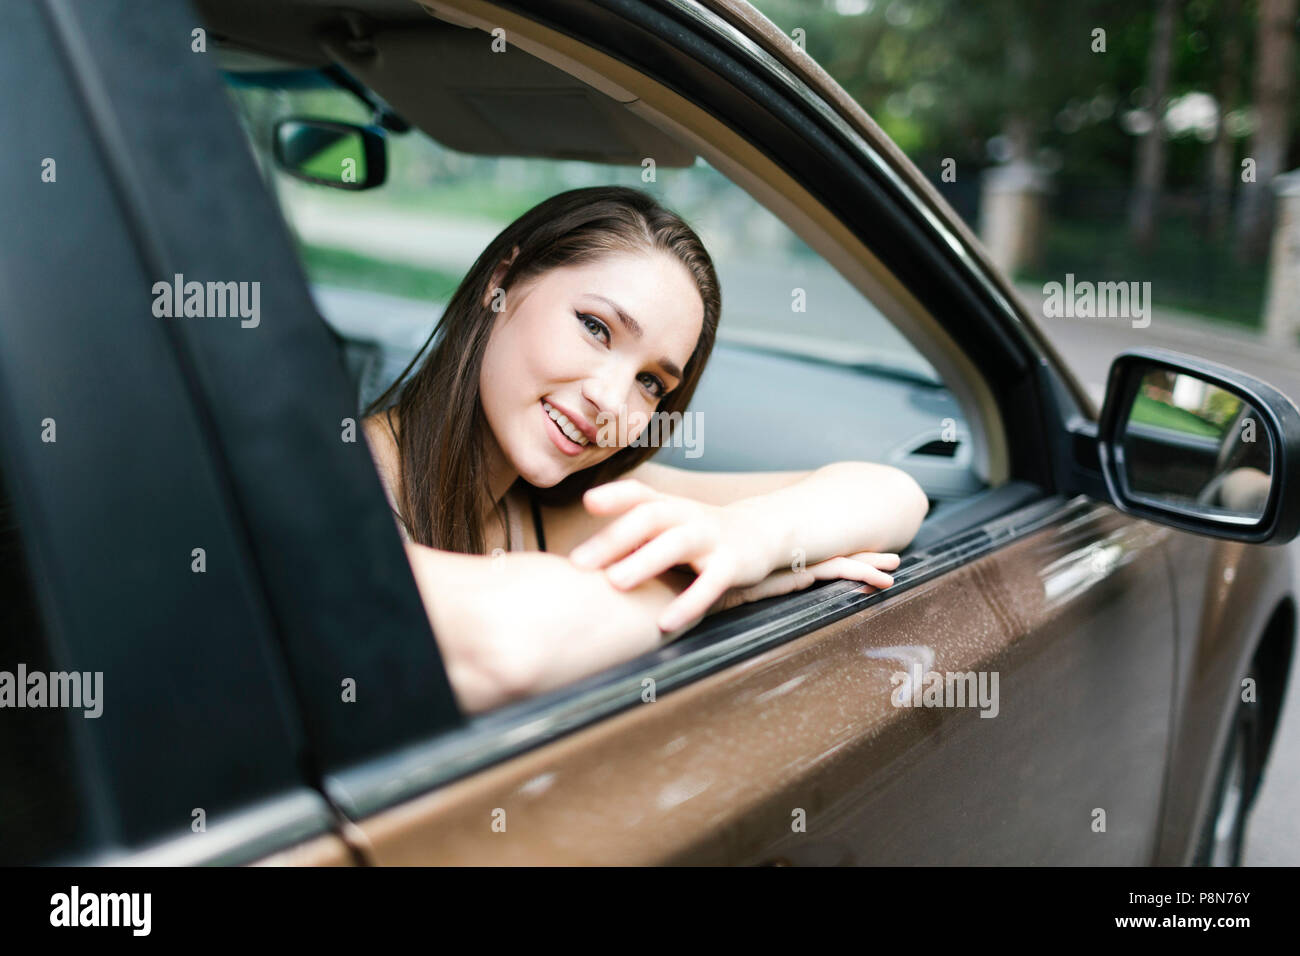 Smiling young woman sitting in car Banque D'Images